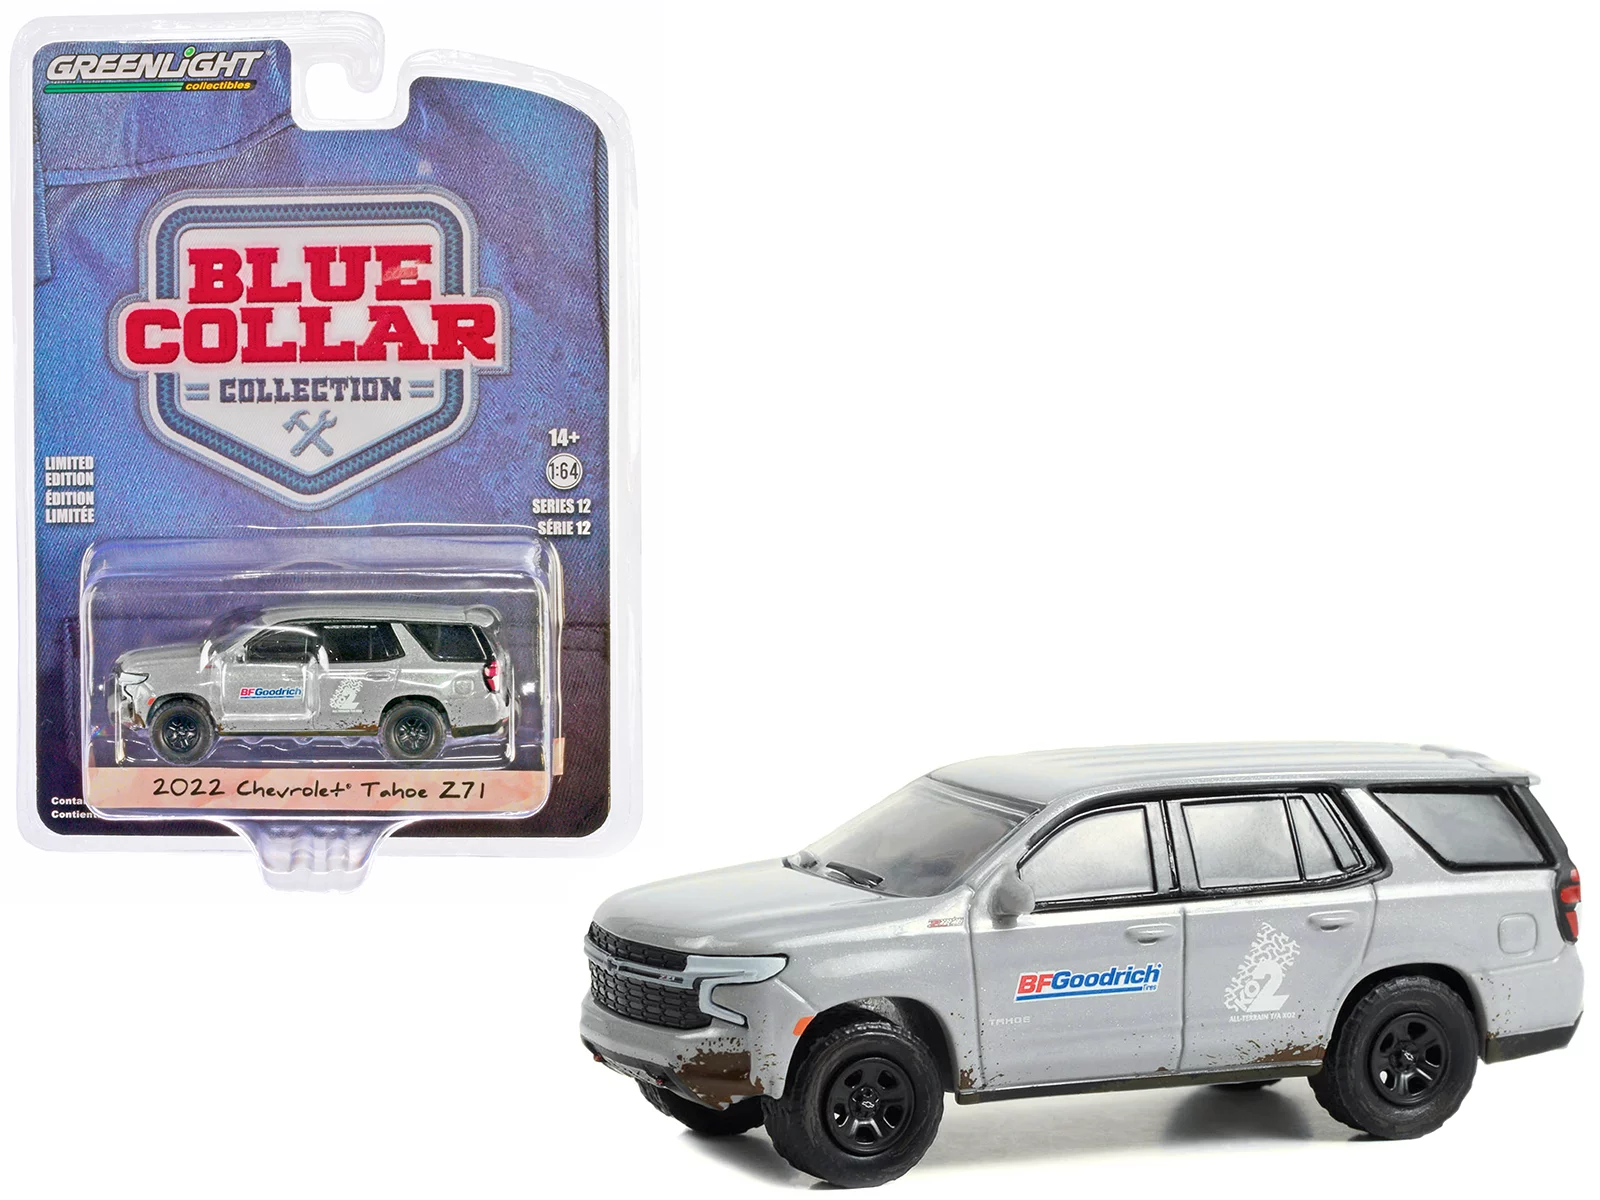 Greenlight 1/64 Blue Collar Collection Series 12- 2022 Chevrolet Tahoe Z71 35260-F